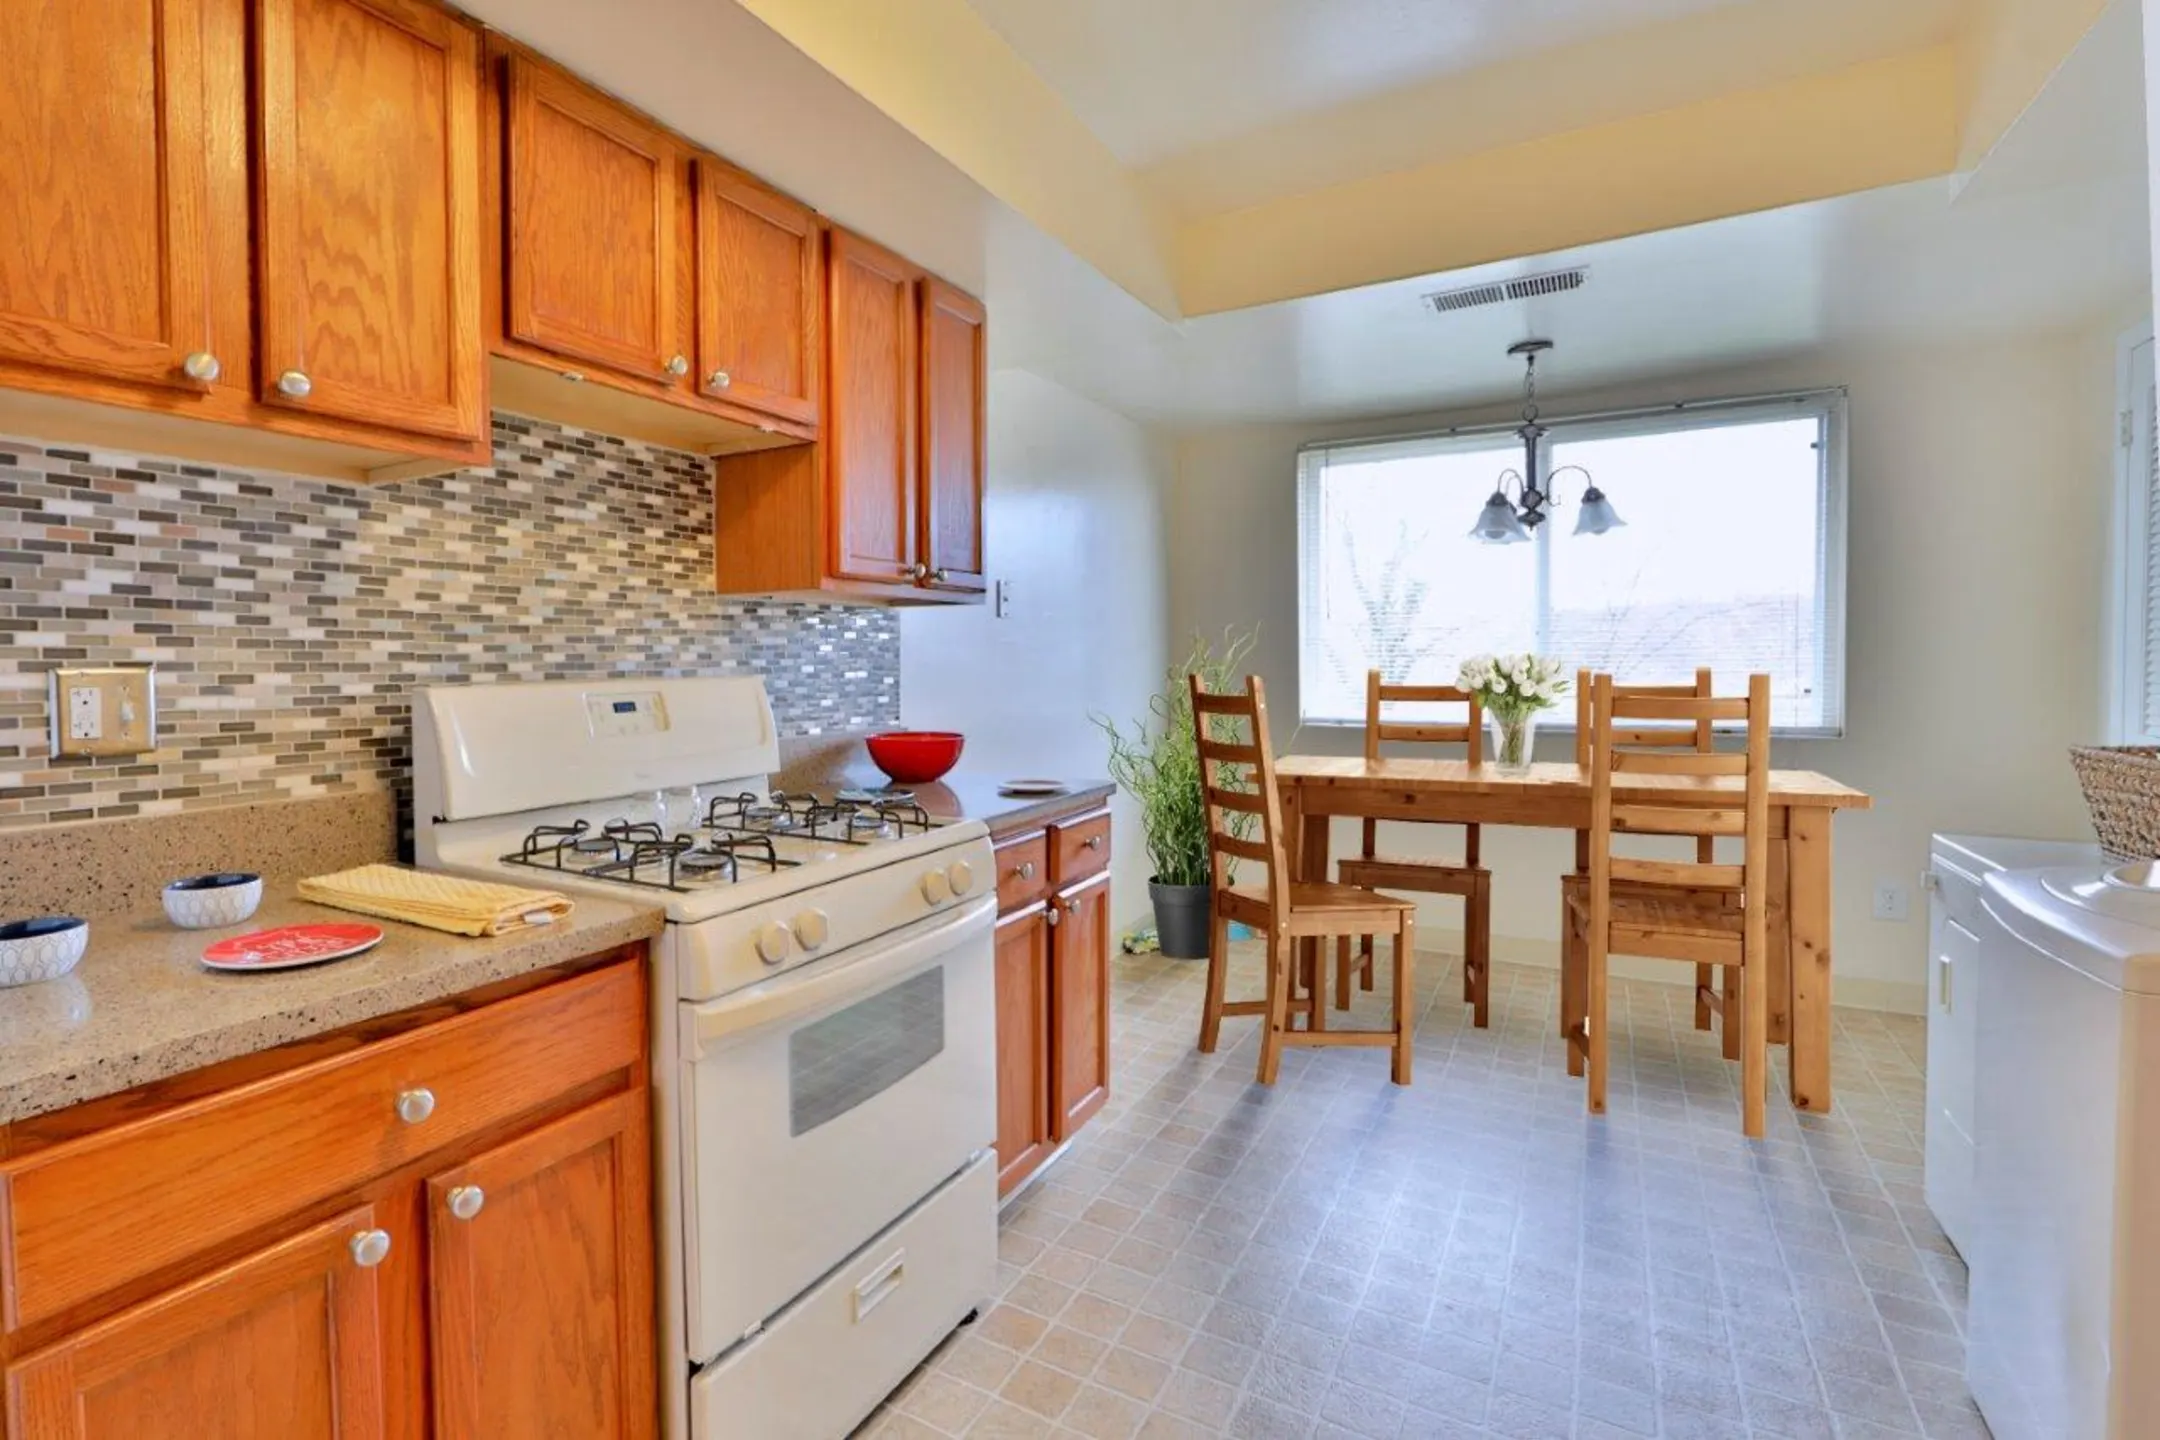 Kitchen - Westerlee Apartment Homes - Catonsville, MD